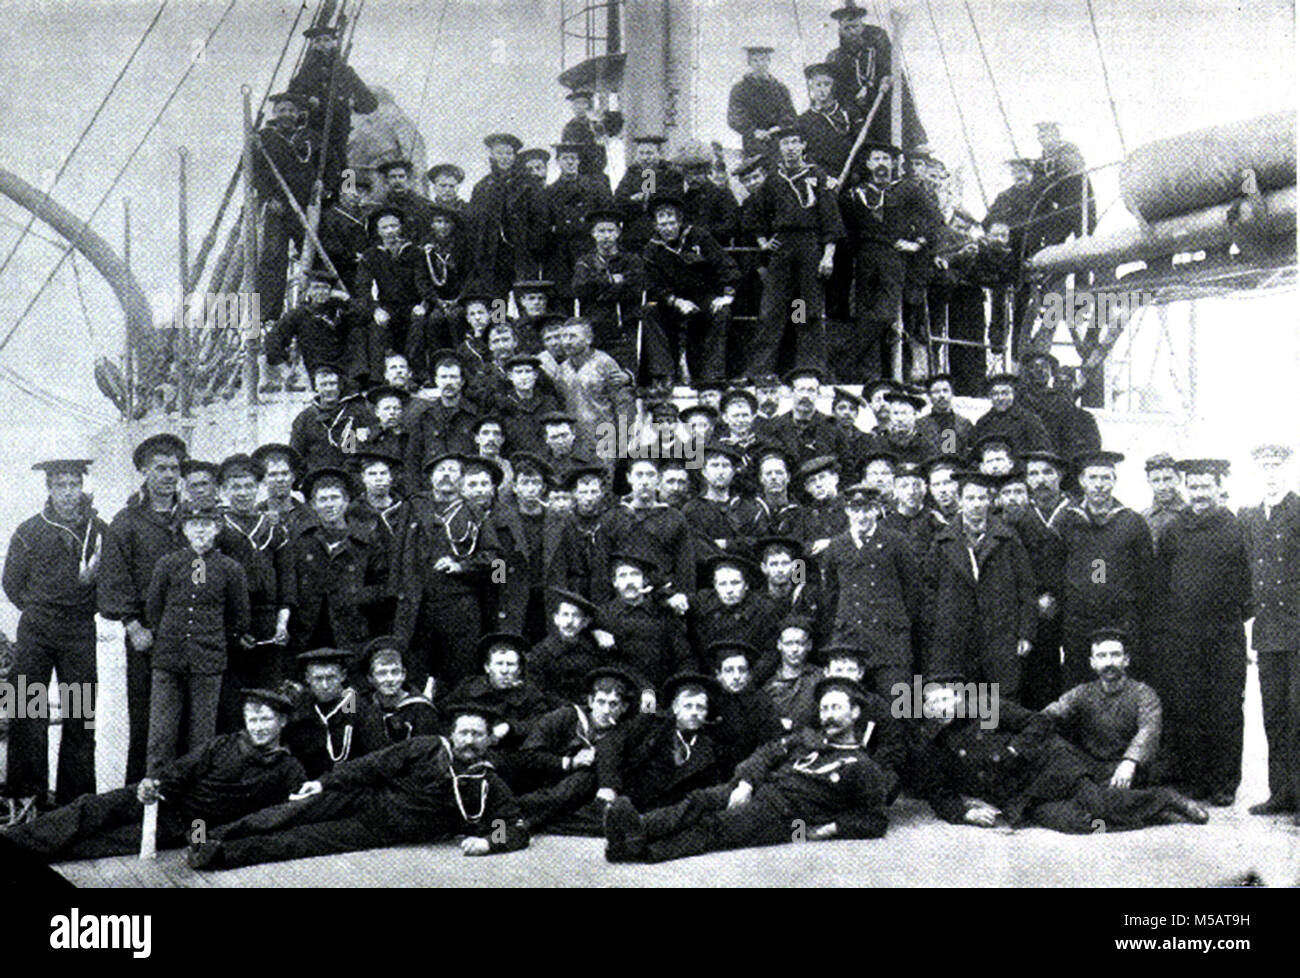 Crew Of Uss Maine Acr 1 Prior To The Sinking Of Uss Maine